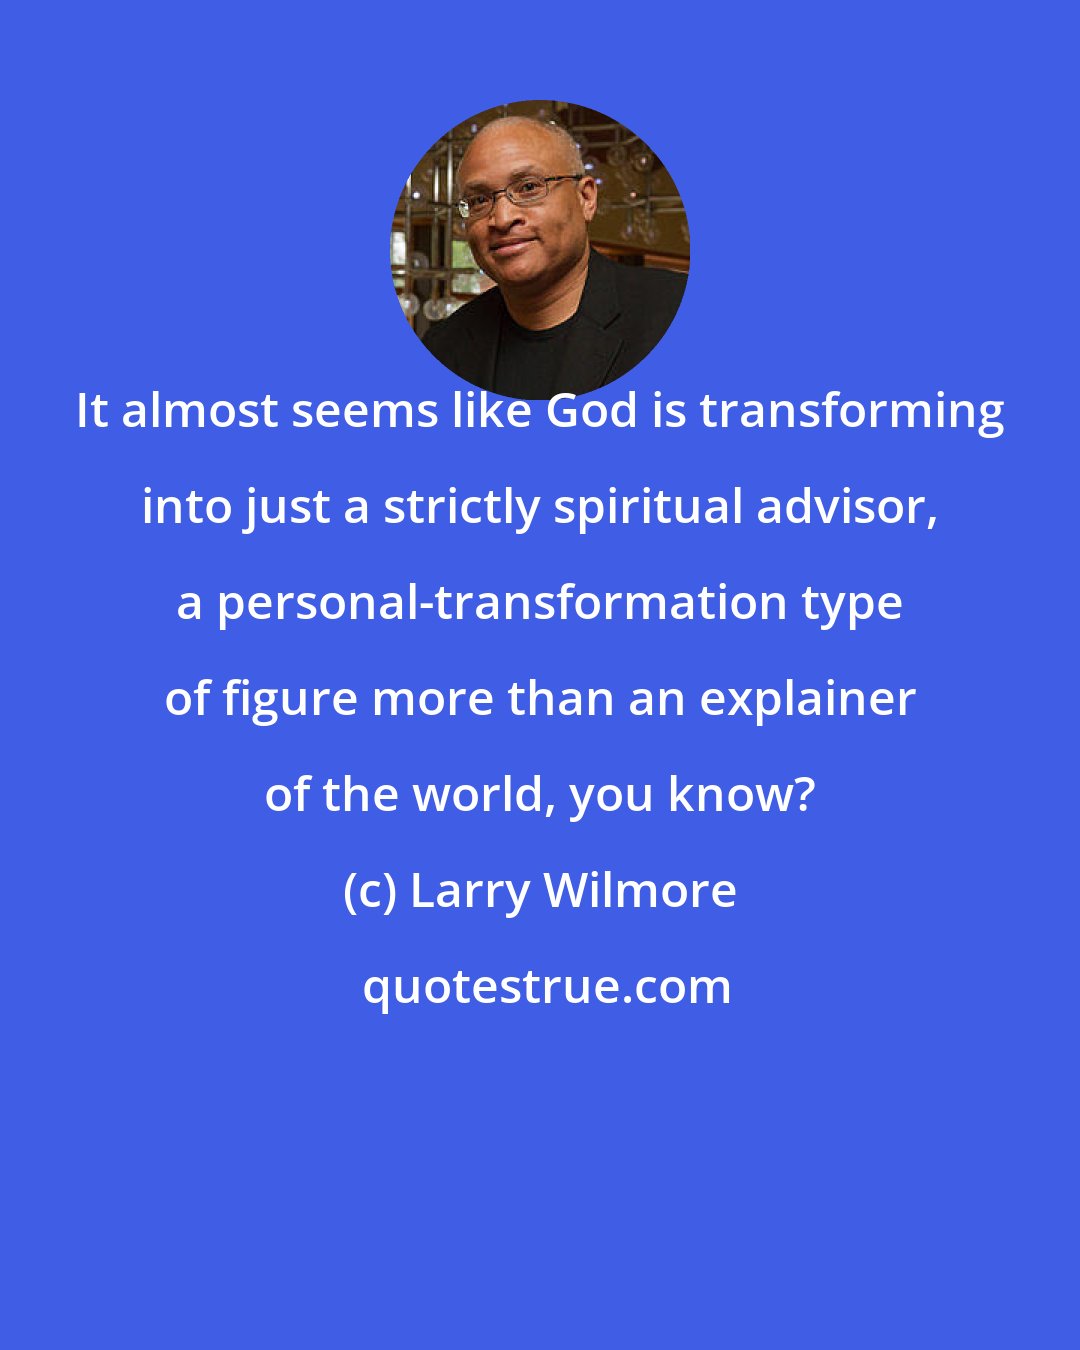 Larry Wilmore: It almost seems like God is transforming into just a strictly spiritual advisor, a personal-transformation type of figure more than an explainer of the world, you know?